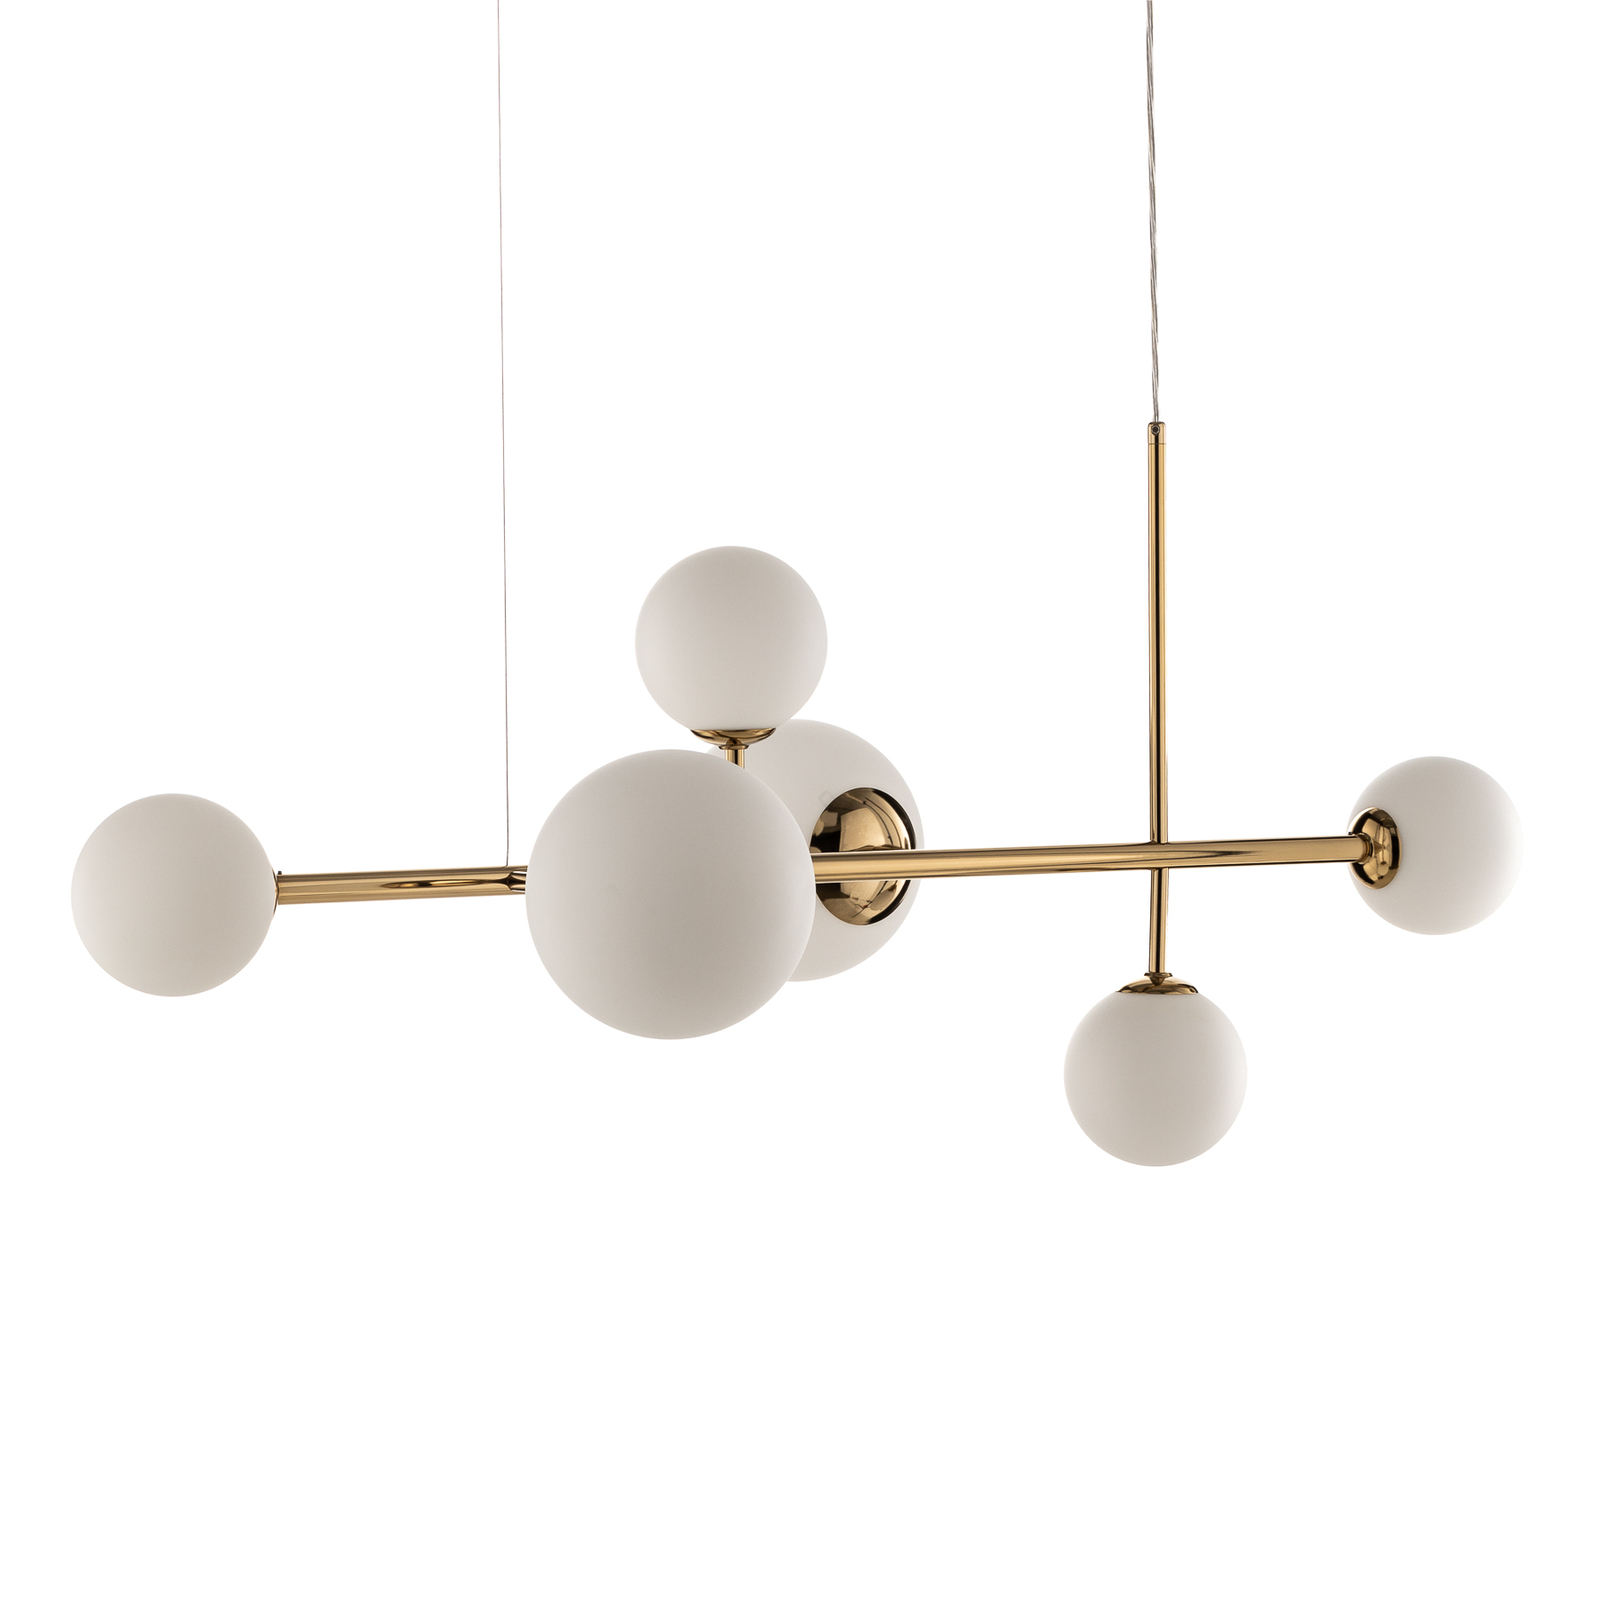 Hanglamp Dione, 6-lamps, goud